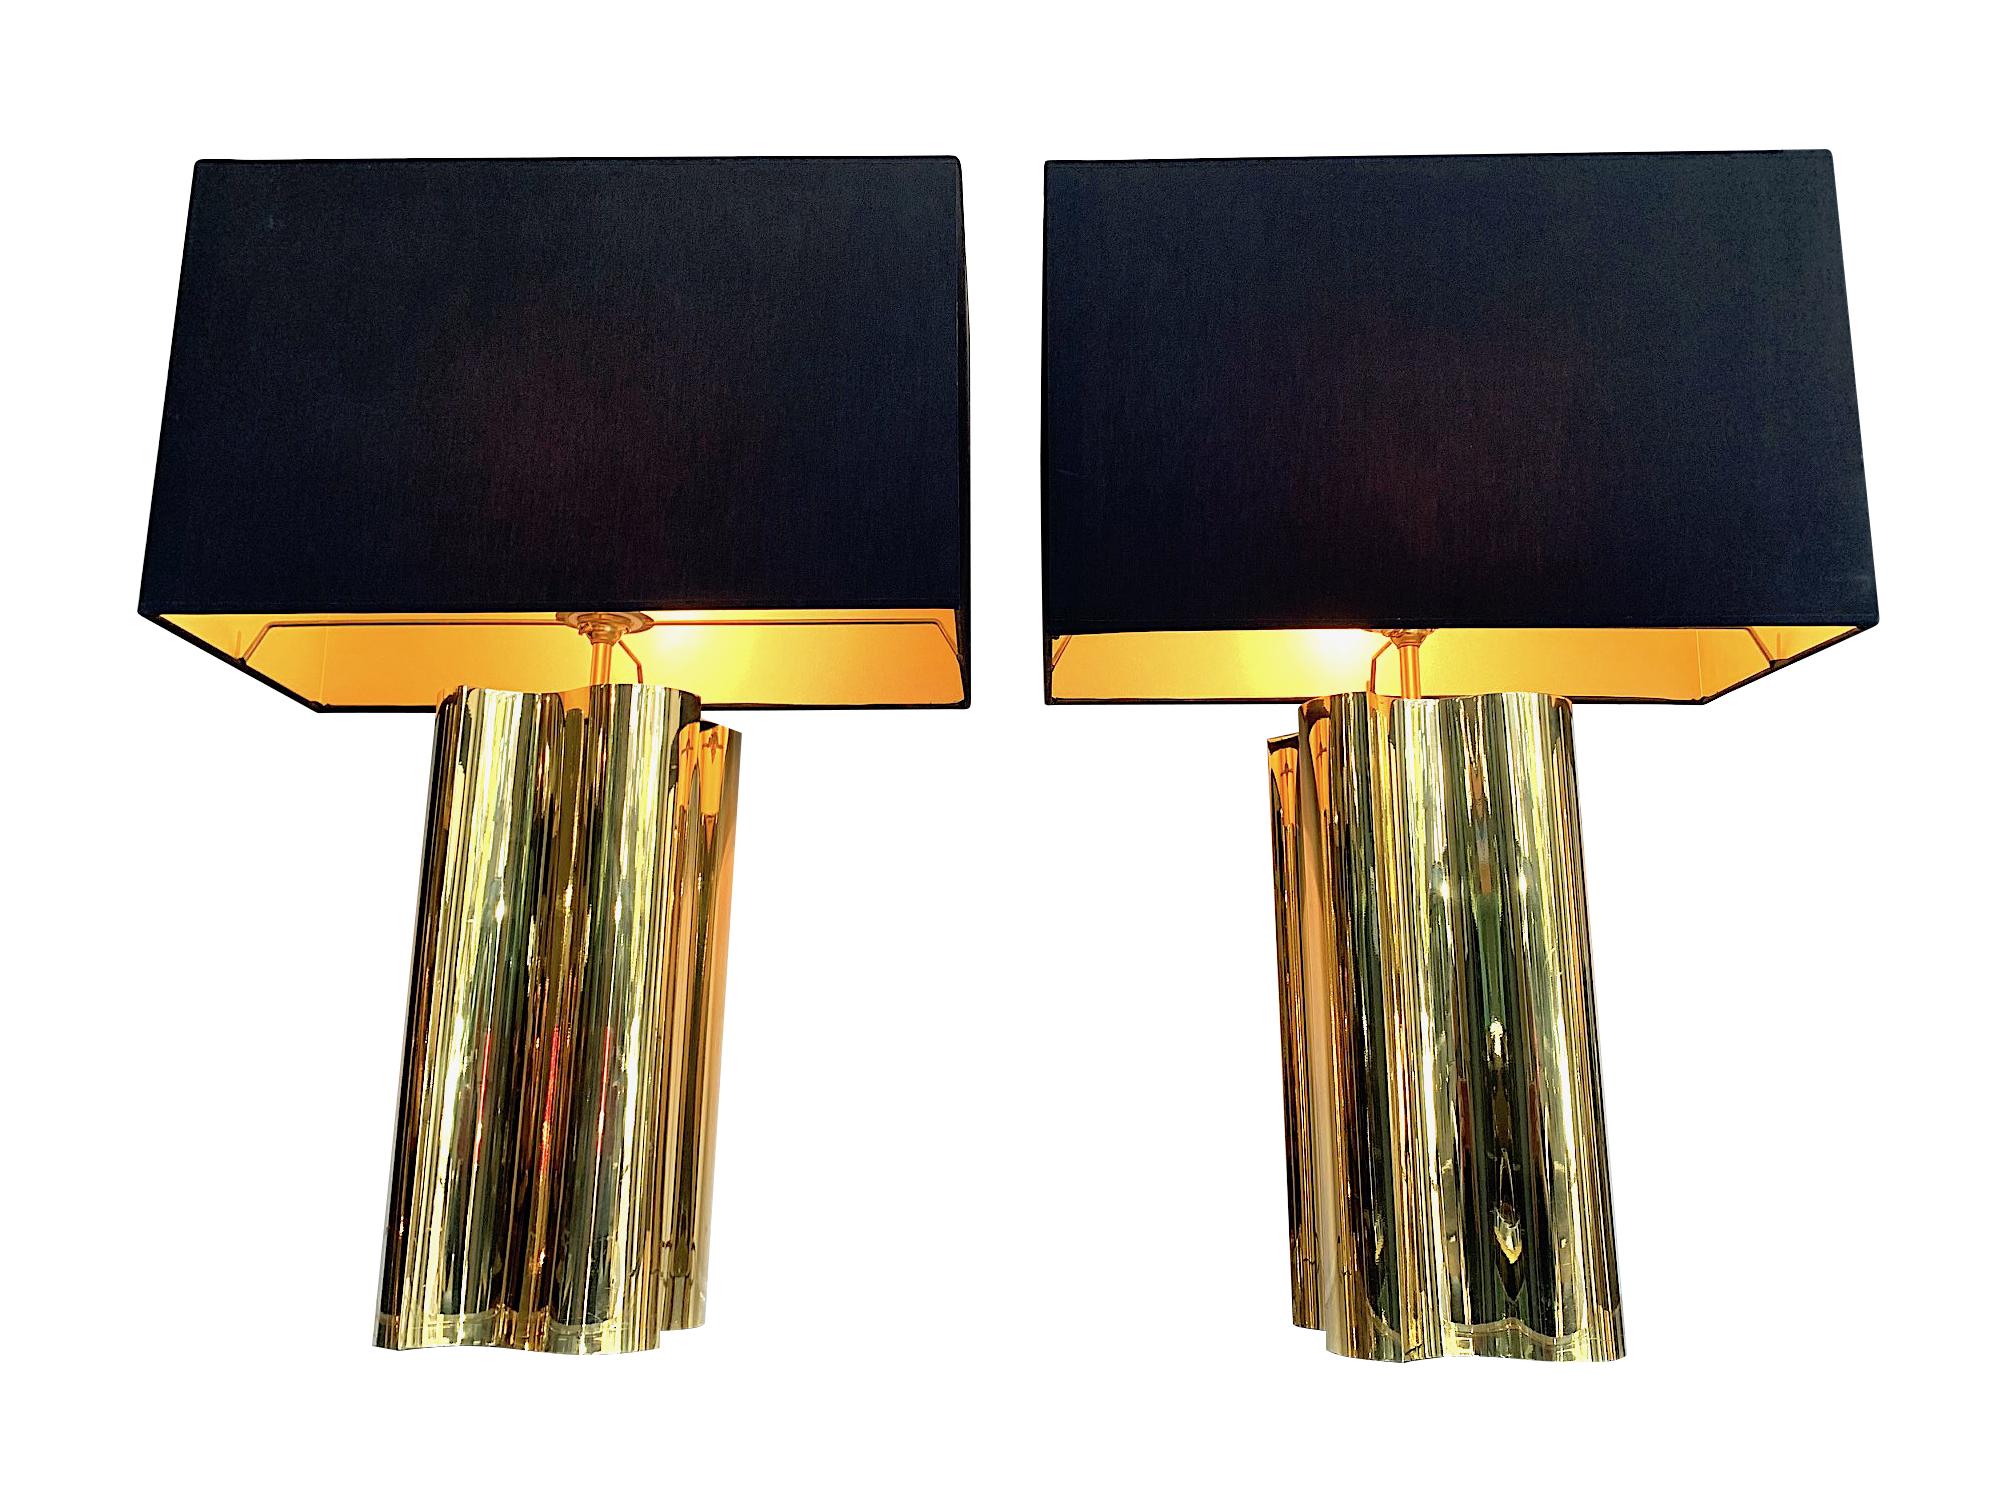 A pair of large 1970s brass lamps with interesting curved corners and new bespoke black shades with gold linings. Re wired with new brass fittings and antique gold cord flex and PAT tested.